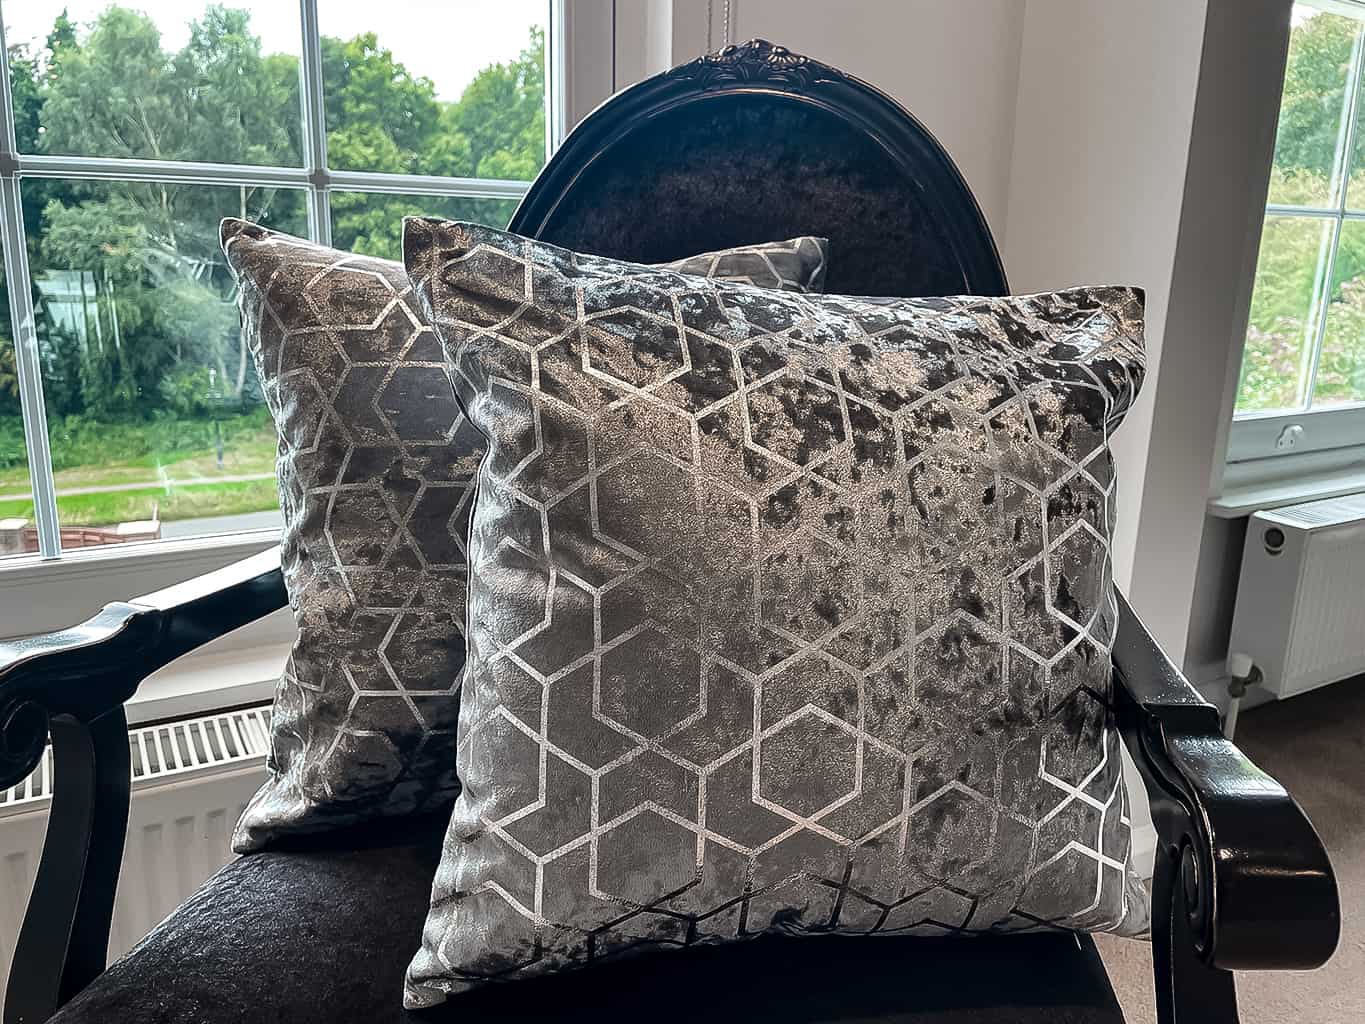 Grey and Silver Velour Cushion